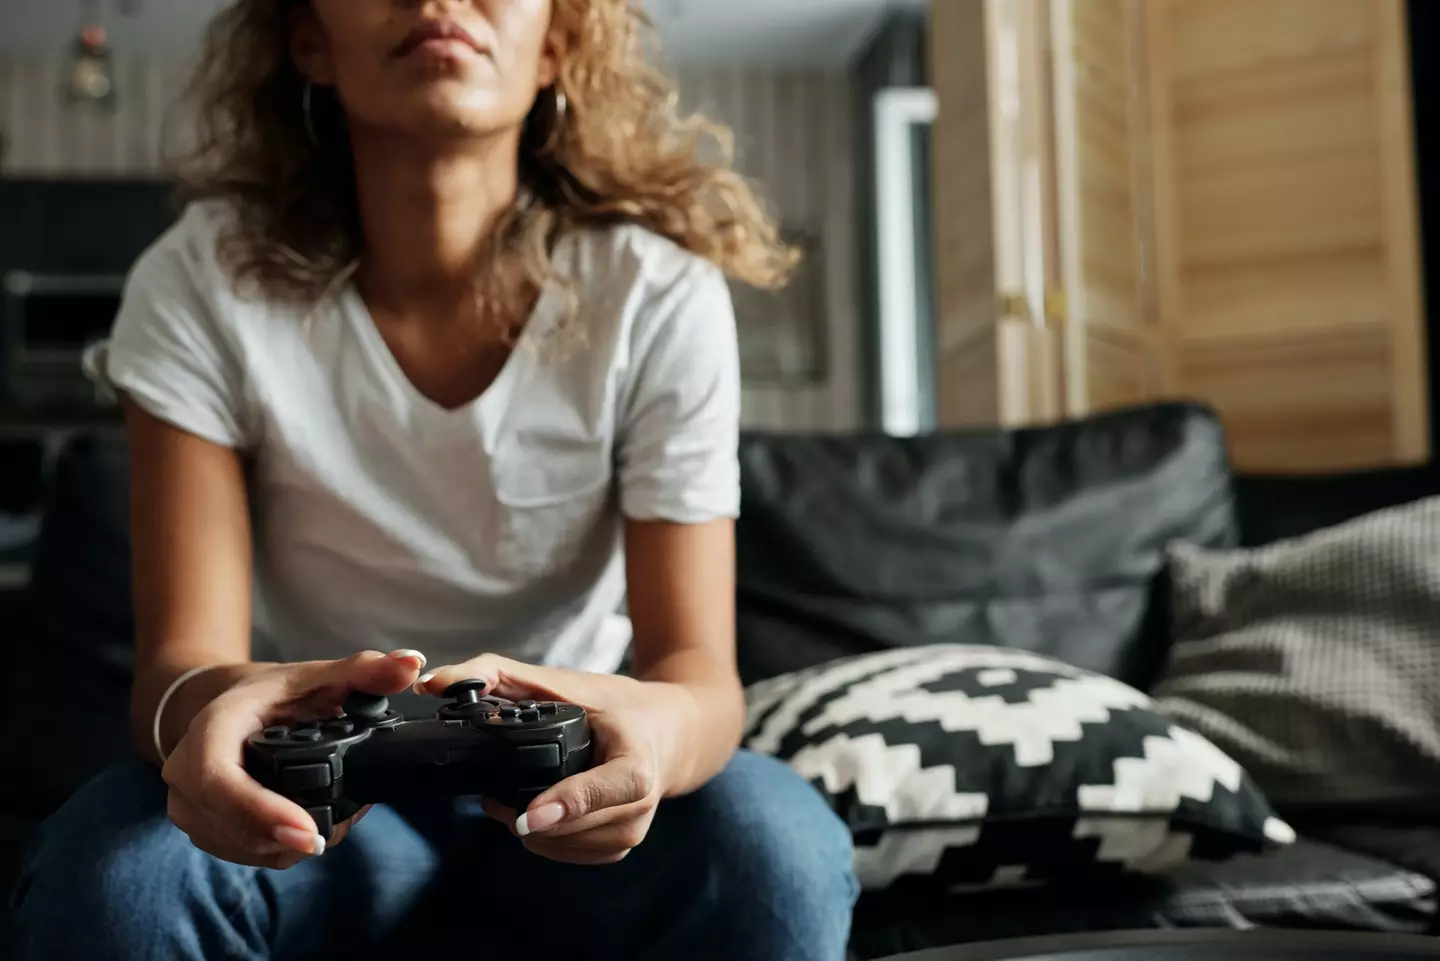 Significantly less women than men actually call themselves gamers.